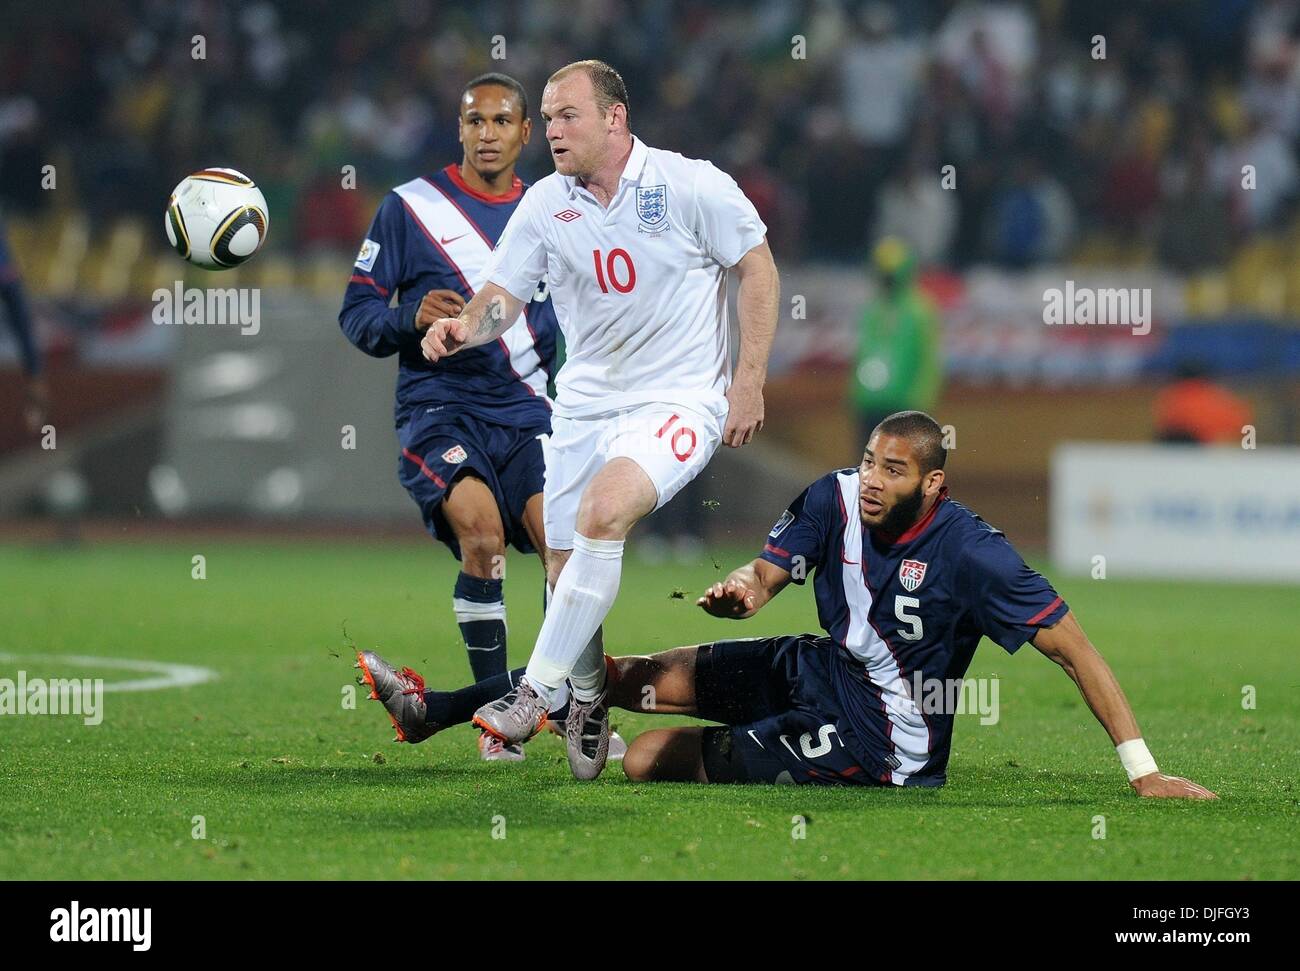 Jun 12, 2010 - Rustenburg, South Africa - WAYNE ROONEY of England fights for the ball with OGUCHI ONYEWU of USA during the FIFA World Cup 2010 football match between England and USA at the Royal Bafokeng Stadium. (Credit Image: Â© Luca Ghidoni/ZUMApress.com) Stock Photo